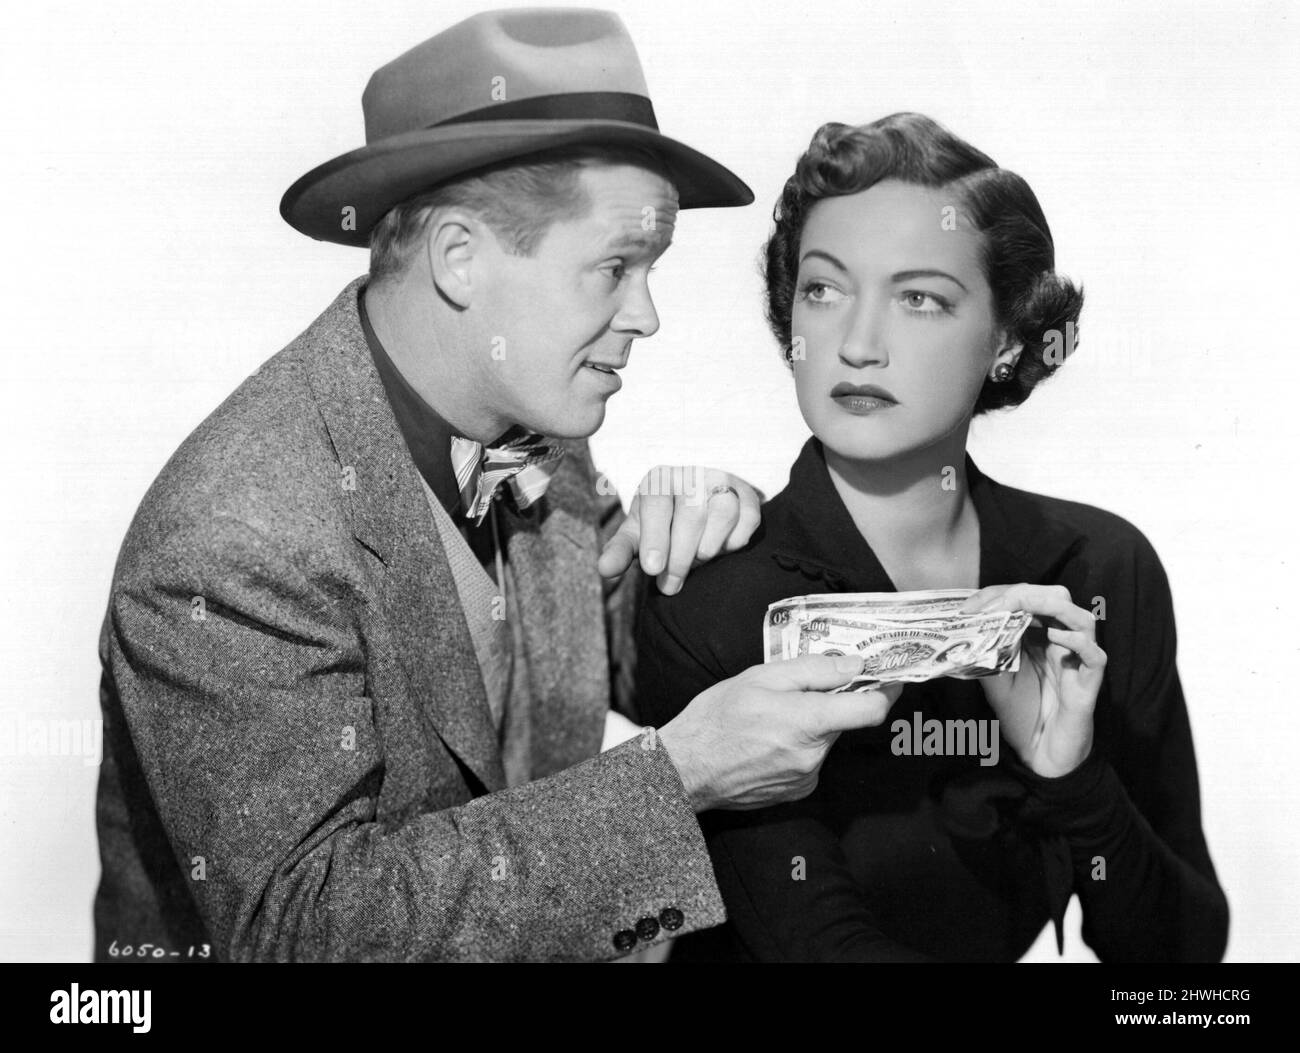 DAN DURYEA and DOROTHY LAMOUR in MANHANDLED (1949), directed by LEWIS R. FOSTER. Credit: PARAMOUNT PICTURES / Album Stock Photo